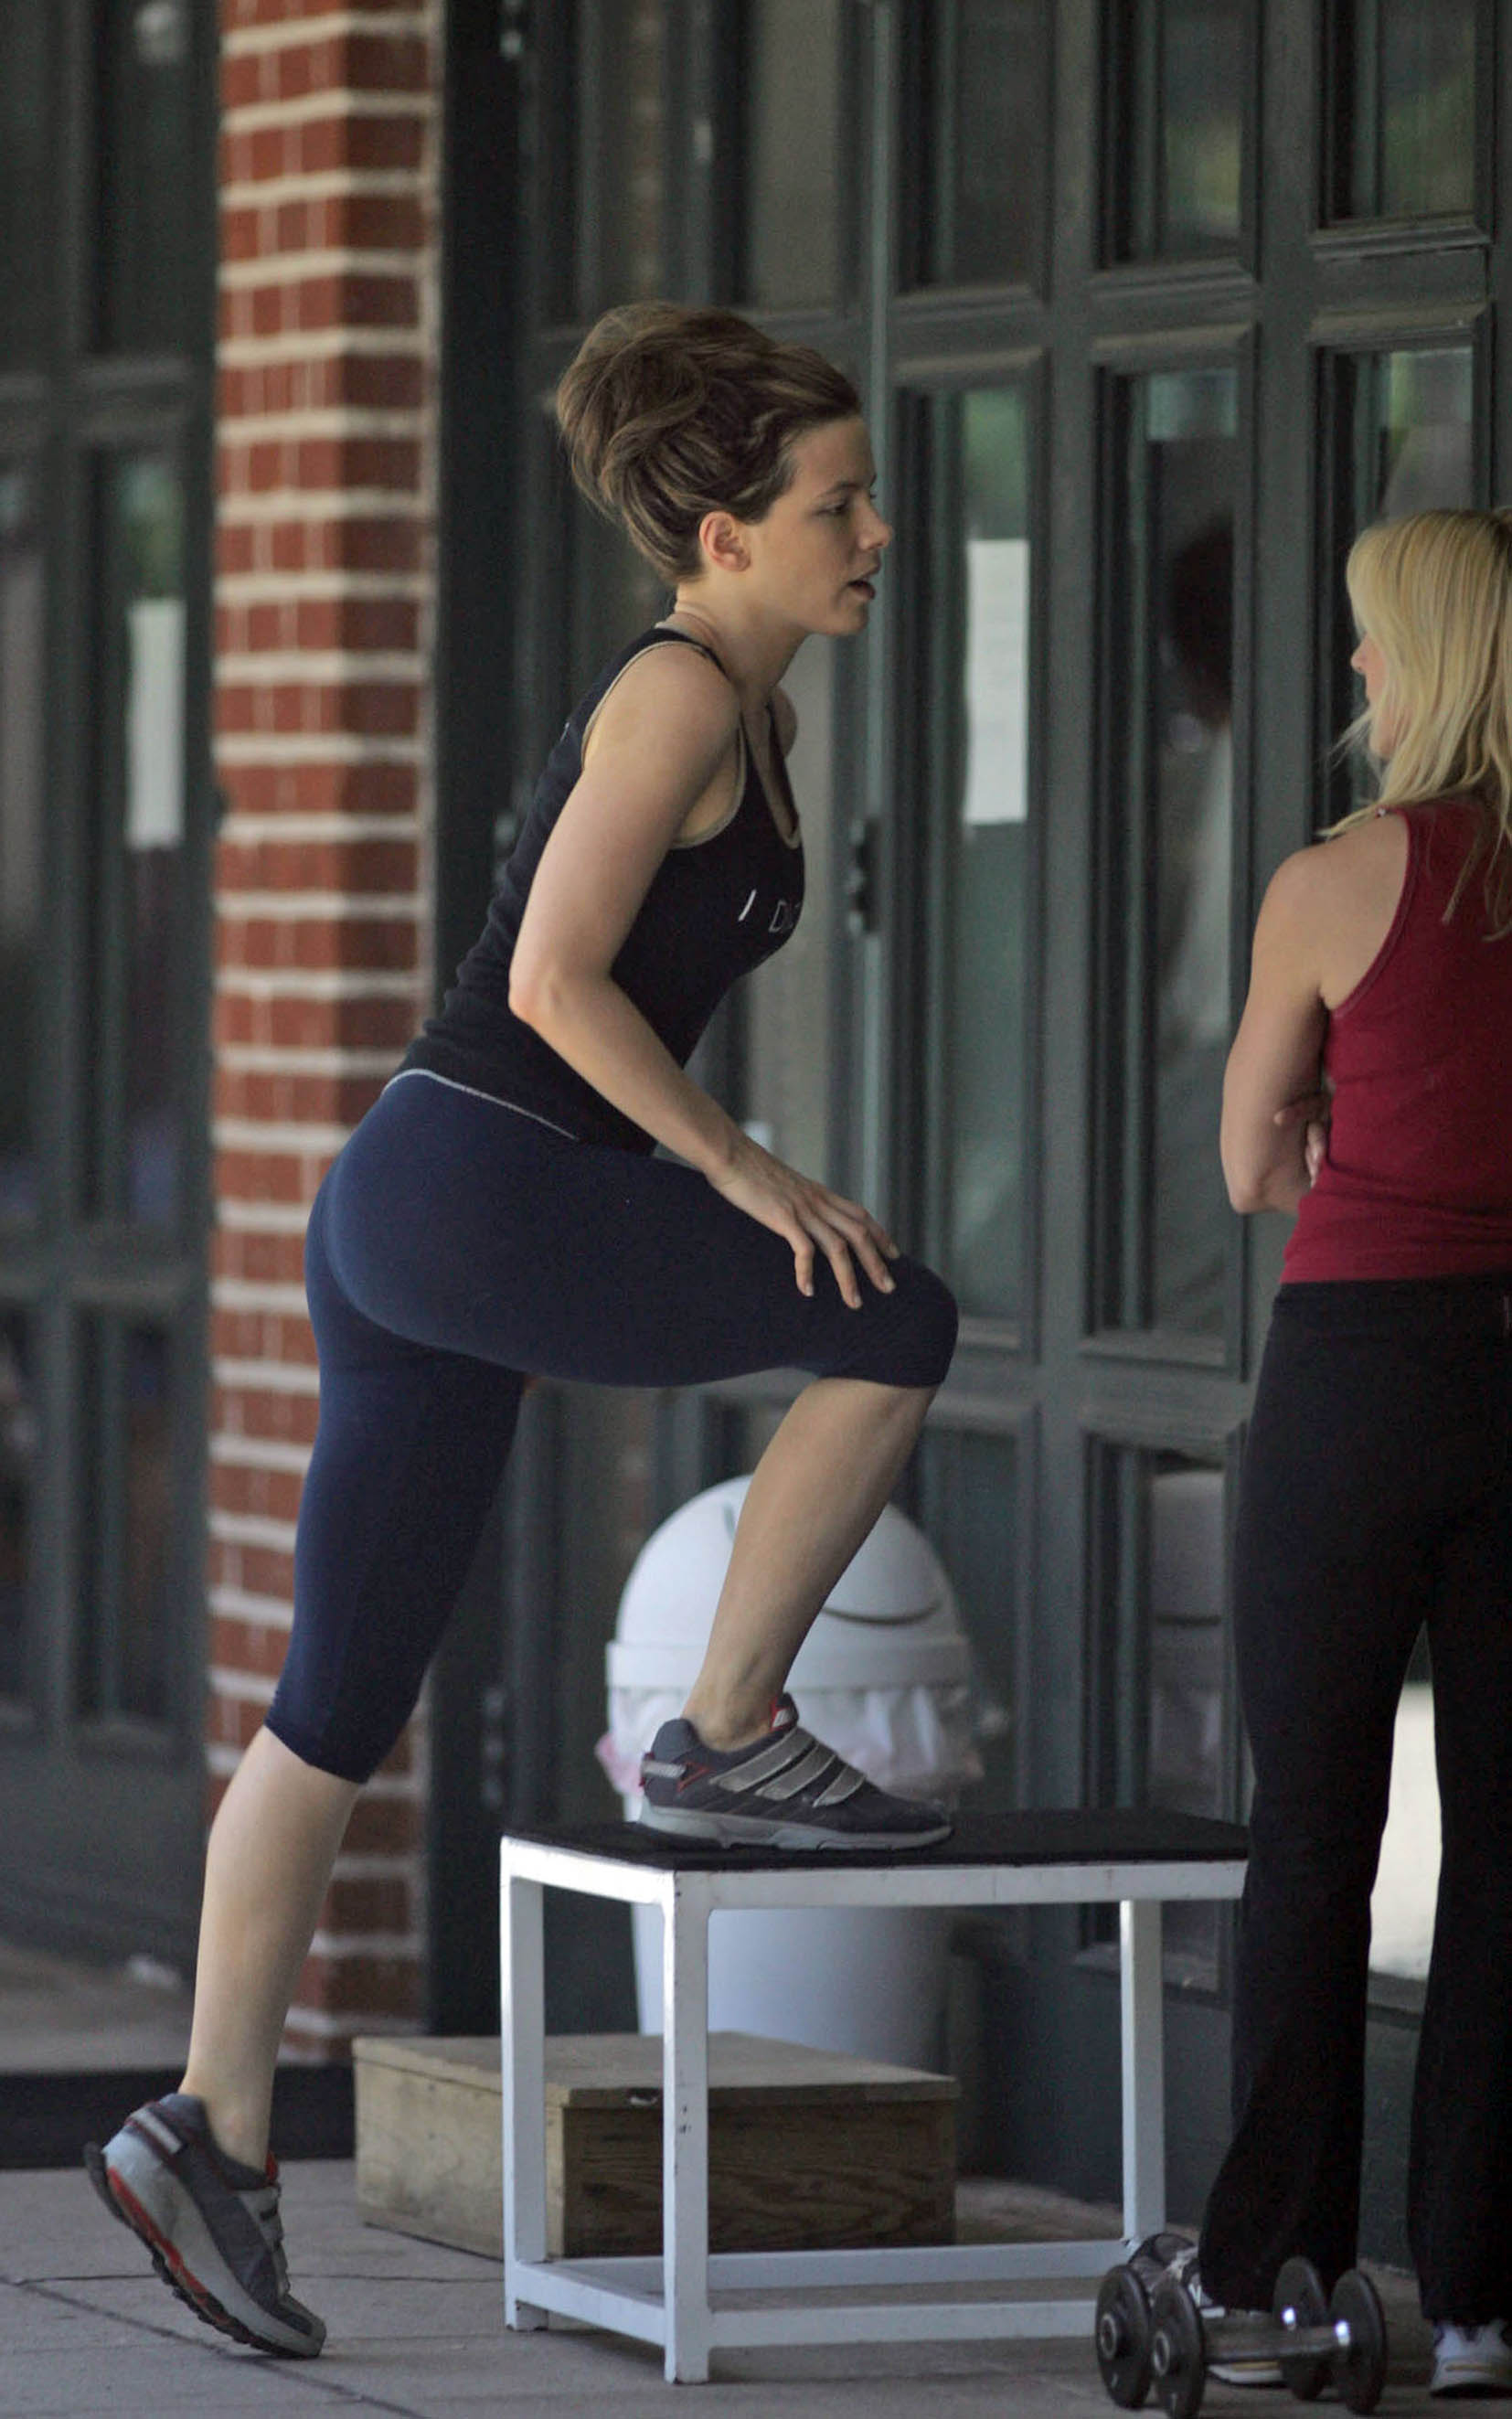 Kate Beckinsale working out in leggings - Oct 2010